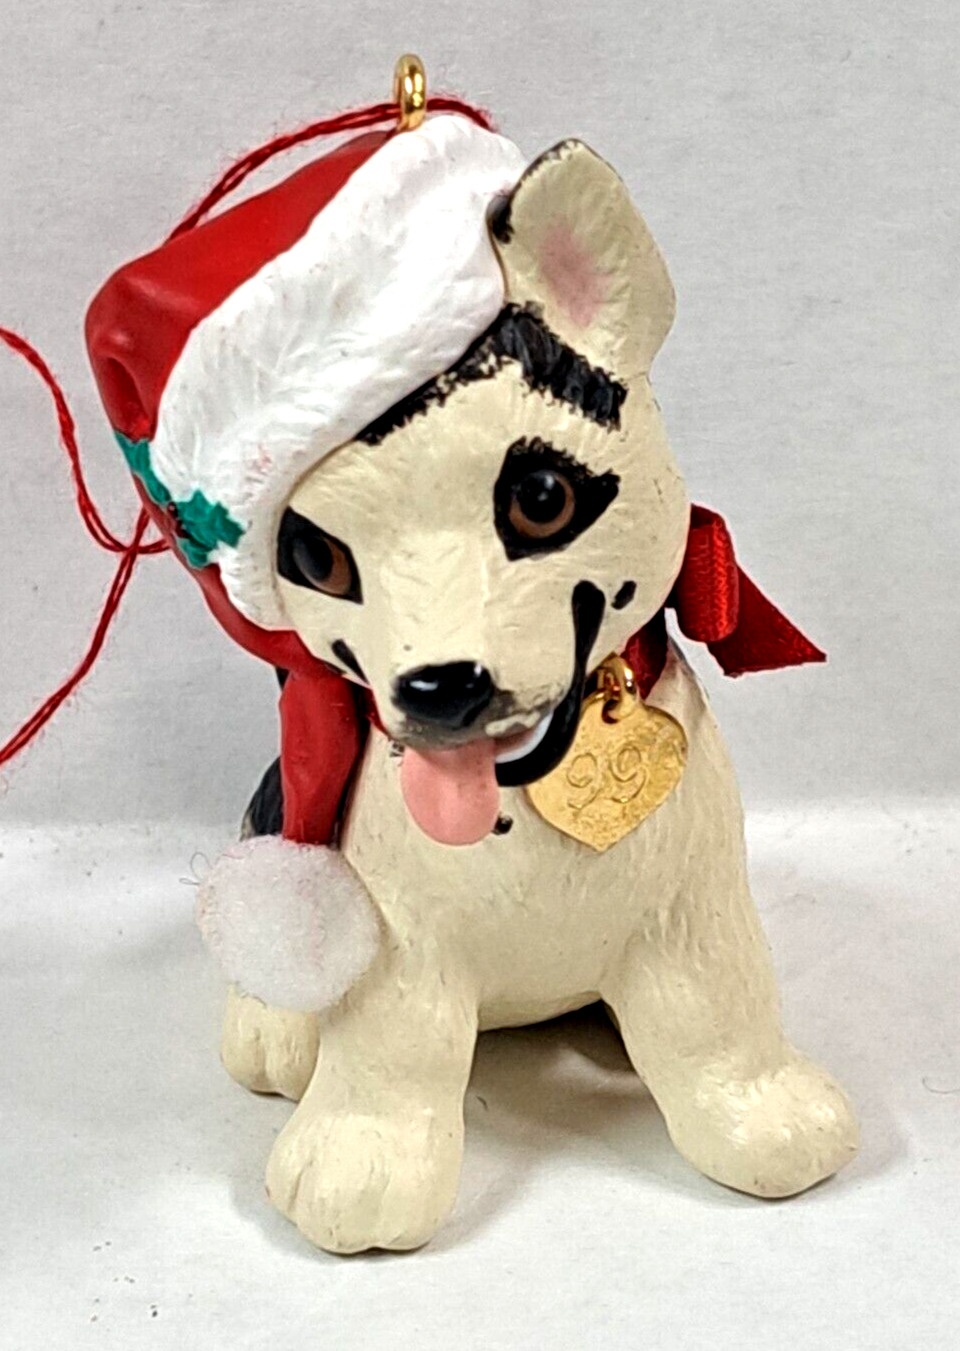 1999 Hallmark Cards Christmas ornament Dog puppy pre-owned 2 1/4 inch tall